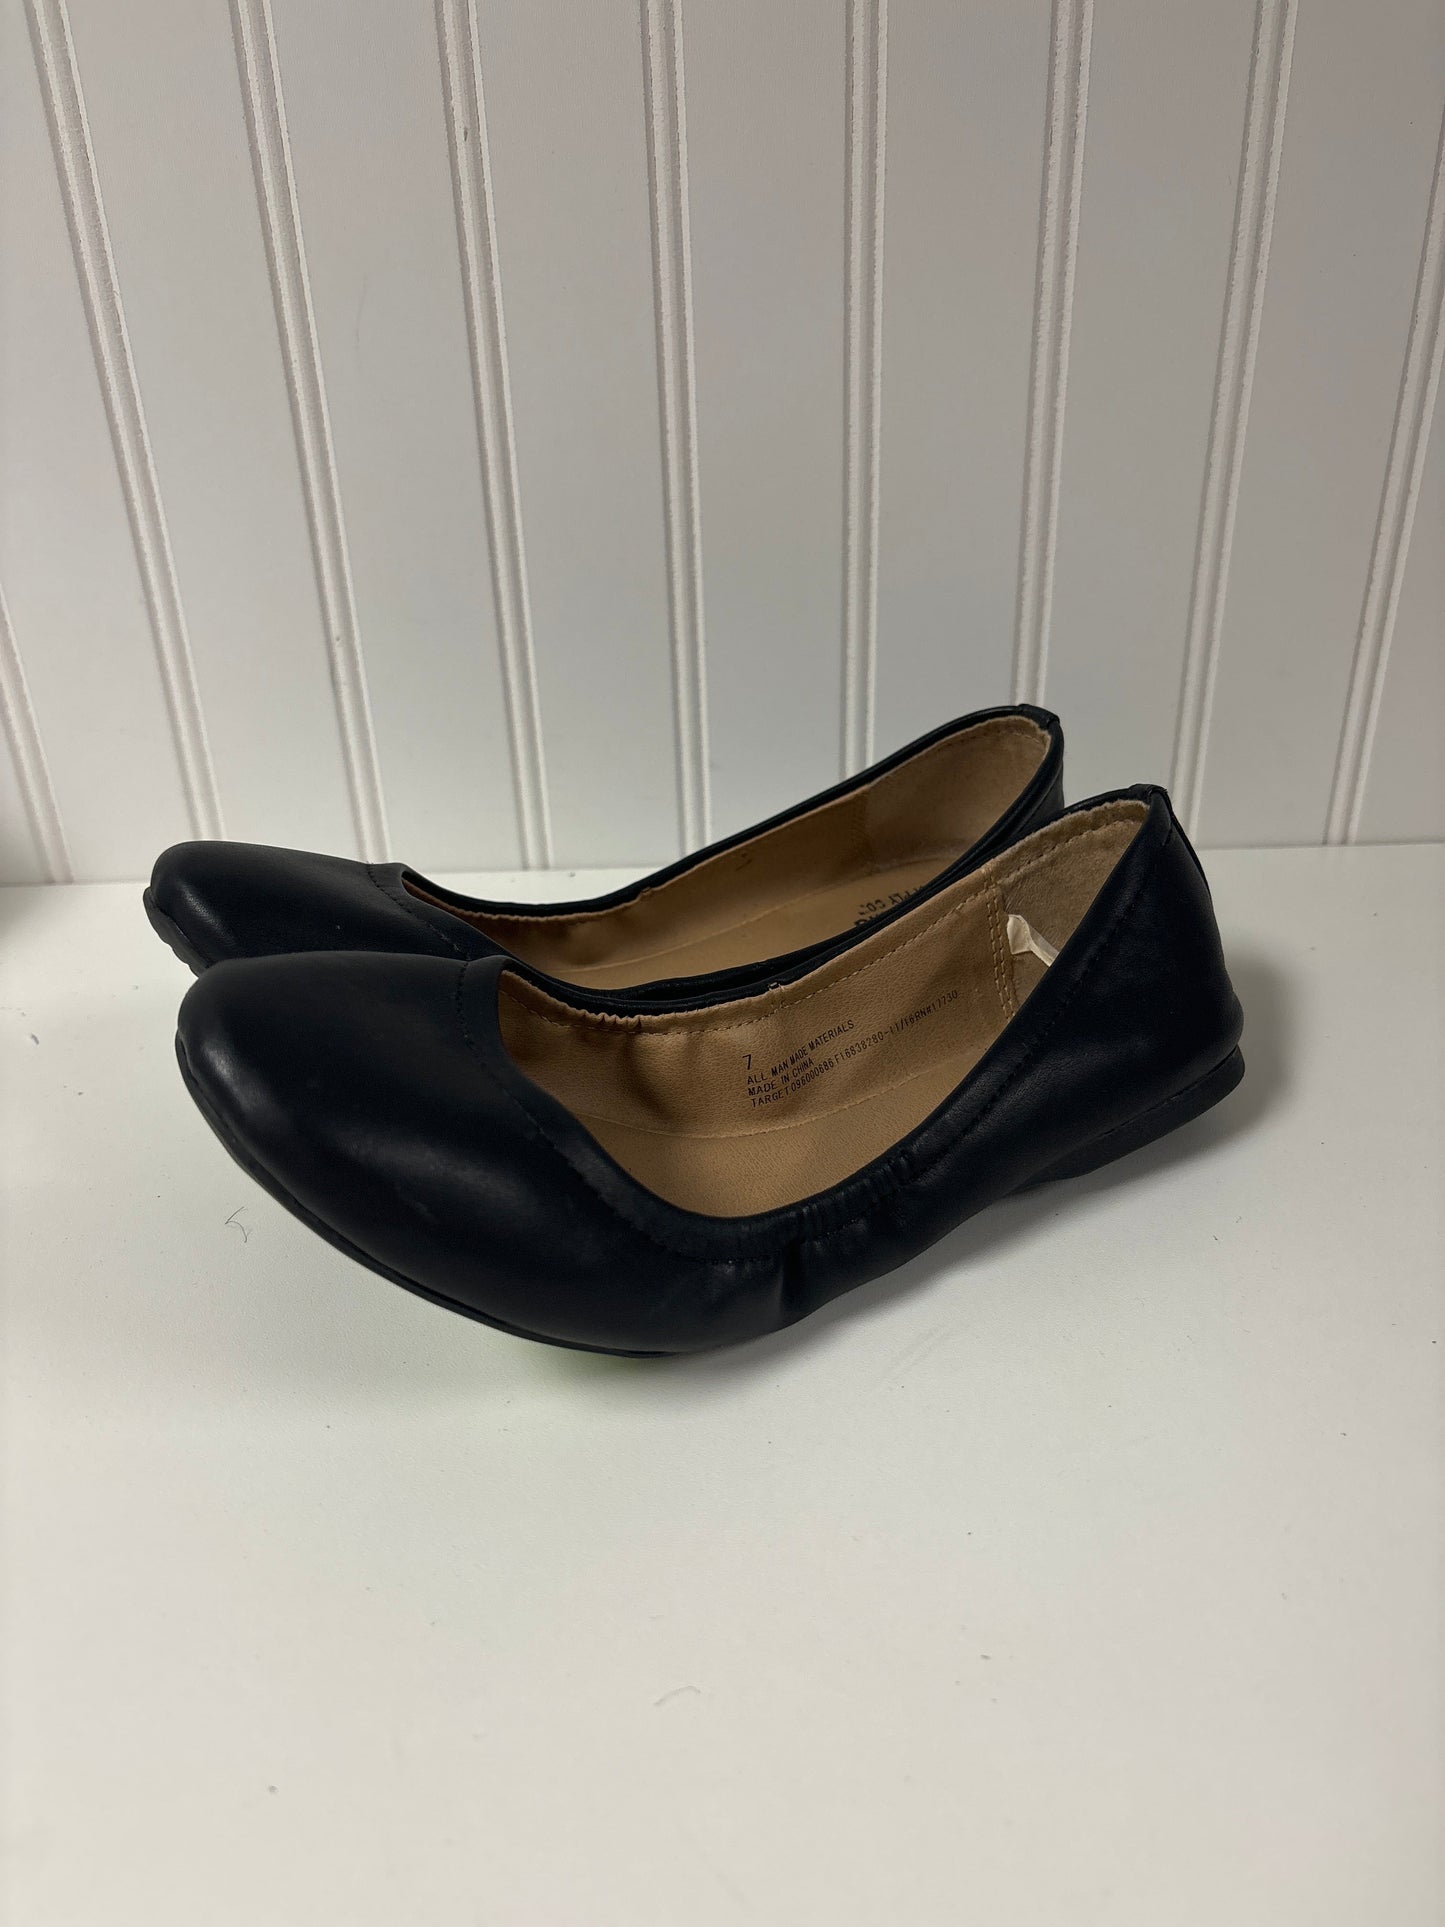 Shoes Flats By Mossimo  Size: 7